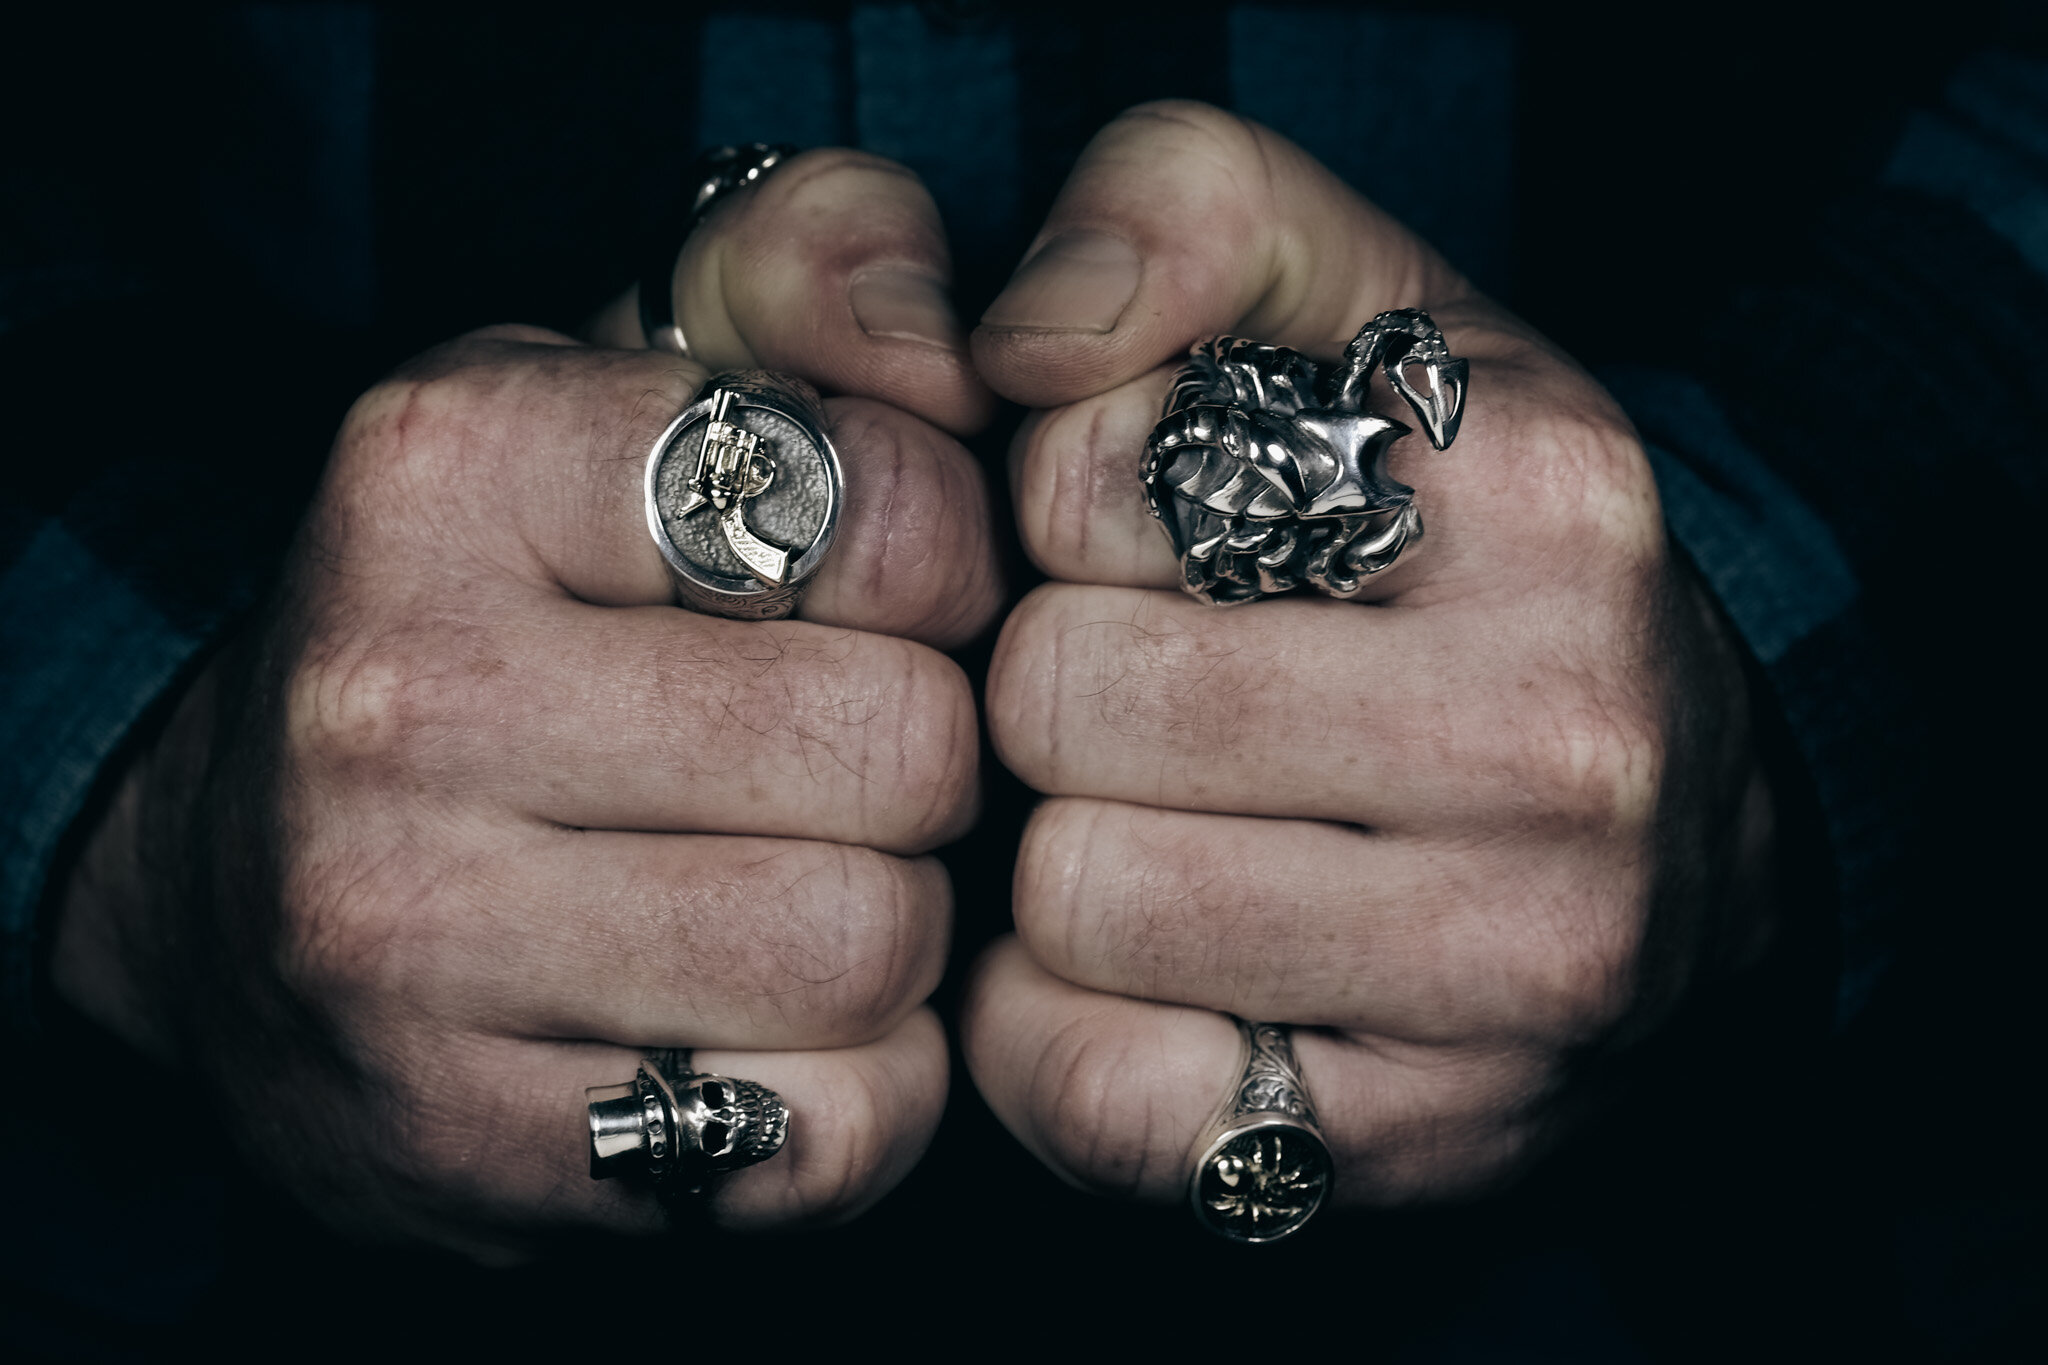 Sometimes the glittery bits are gold #alastairscollection 

#gunring #goldandsilver #mensrings #1percent #bikers #outlawbiker 
p.s. the revolver cylinder spins and the skulls jaw move #fidgetjewelry